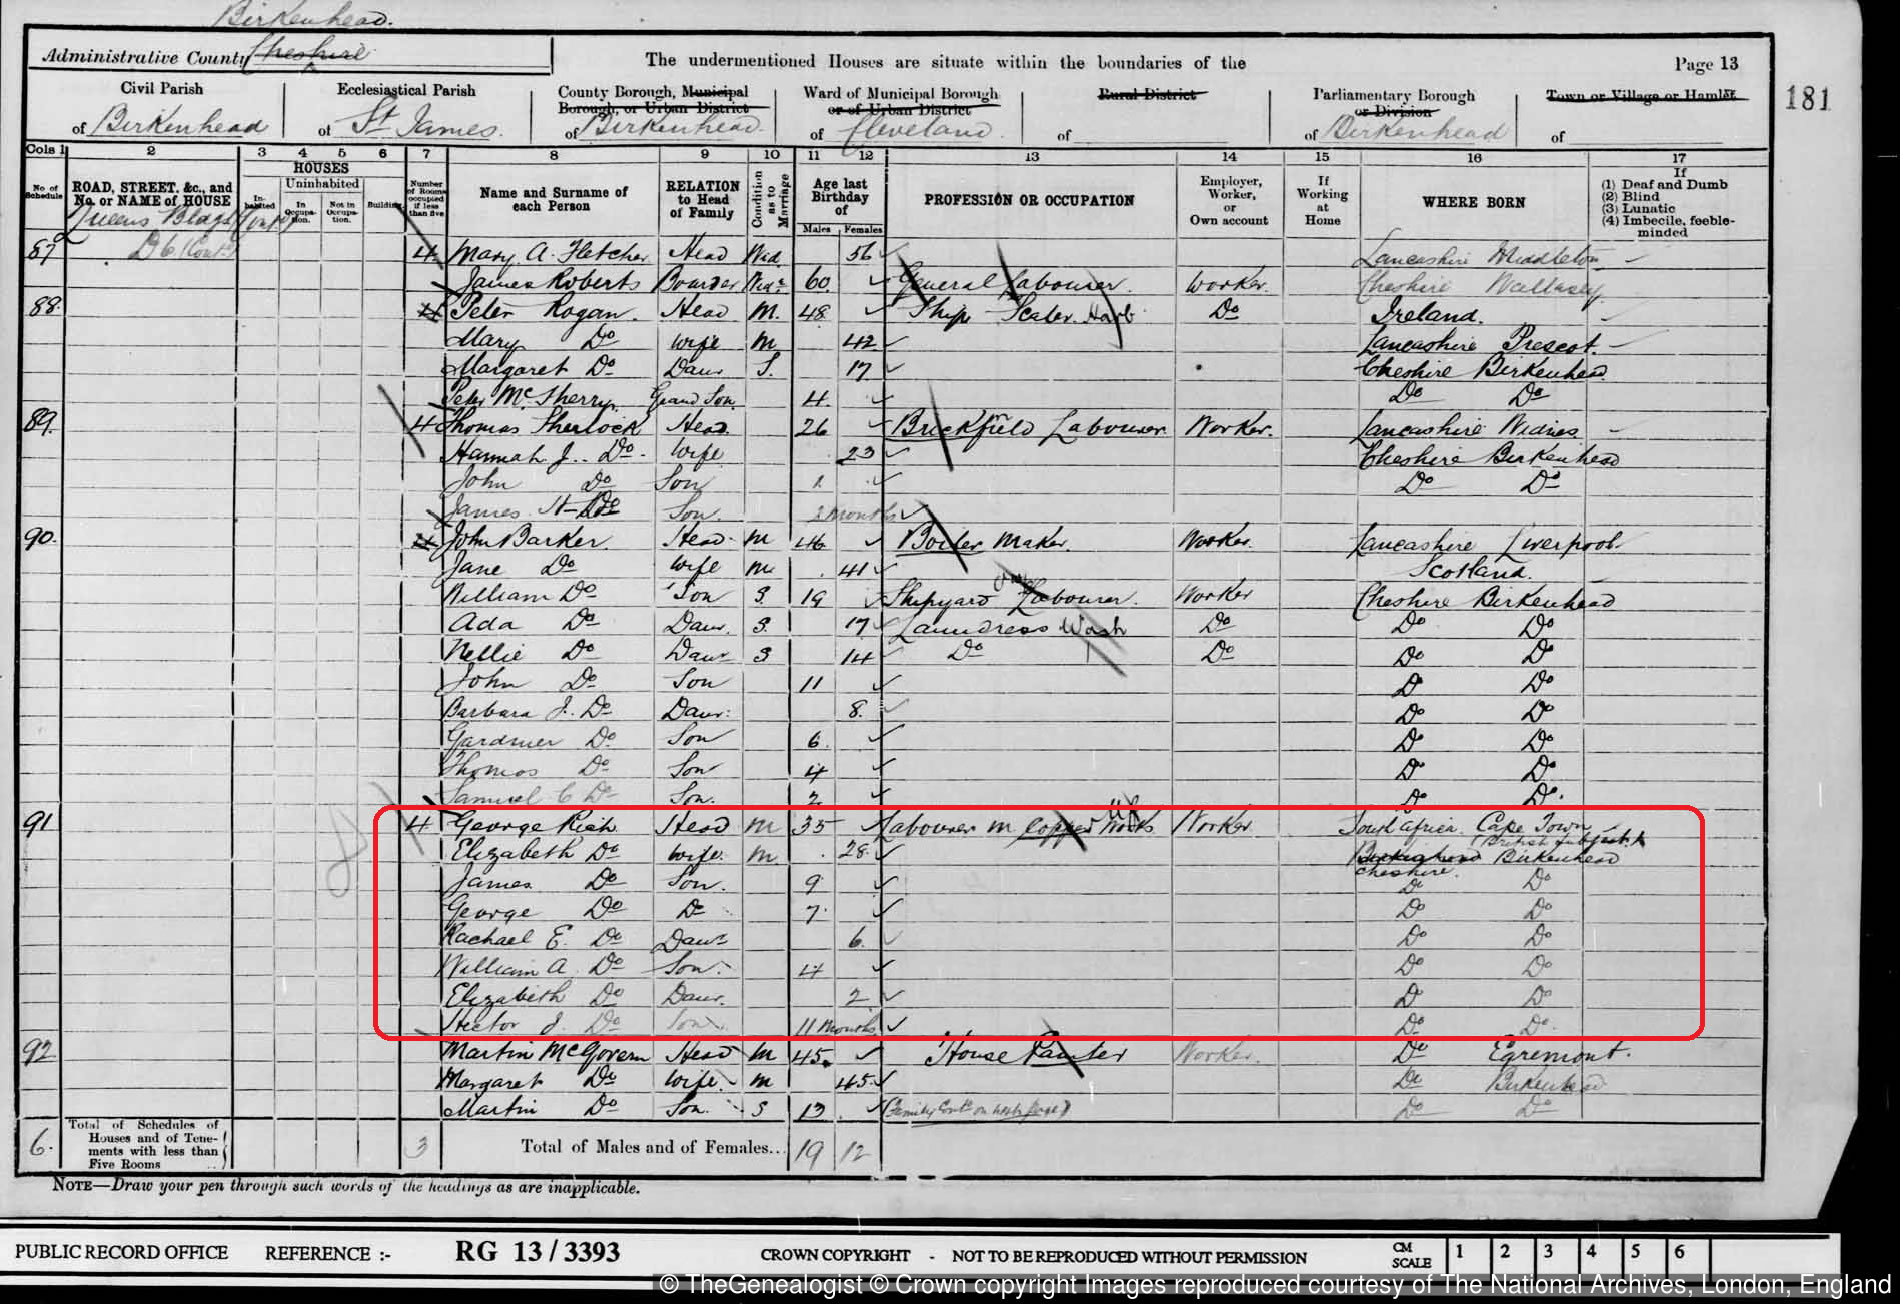 George Rich in the 1901 census on TheGenealogist reveals that he was born in South Africa